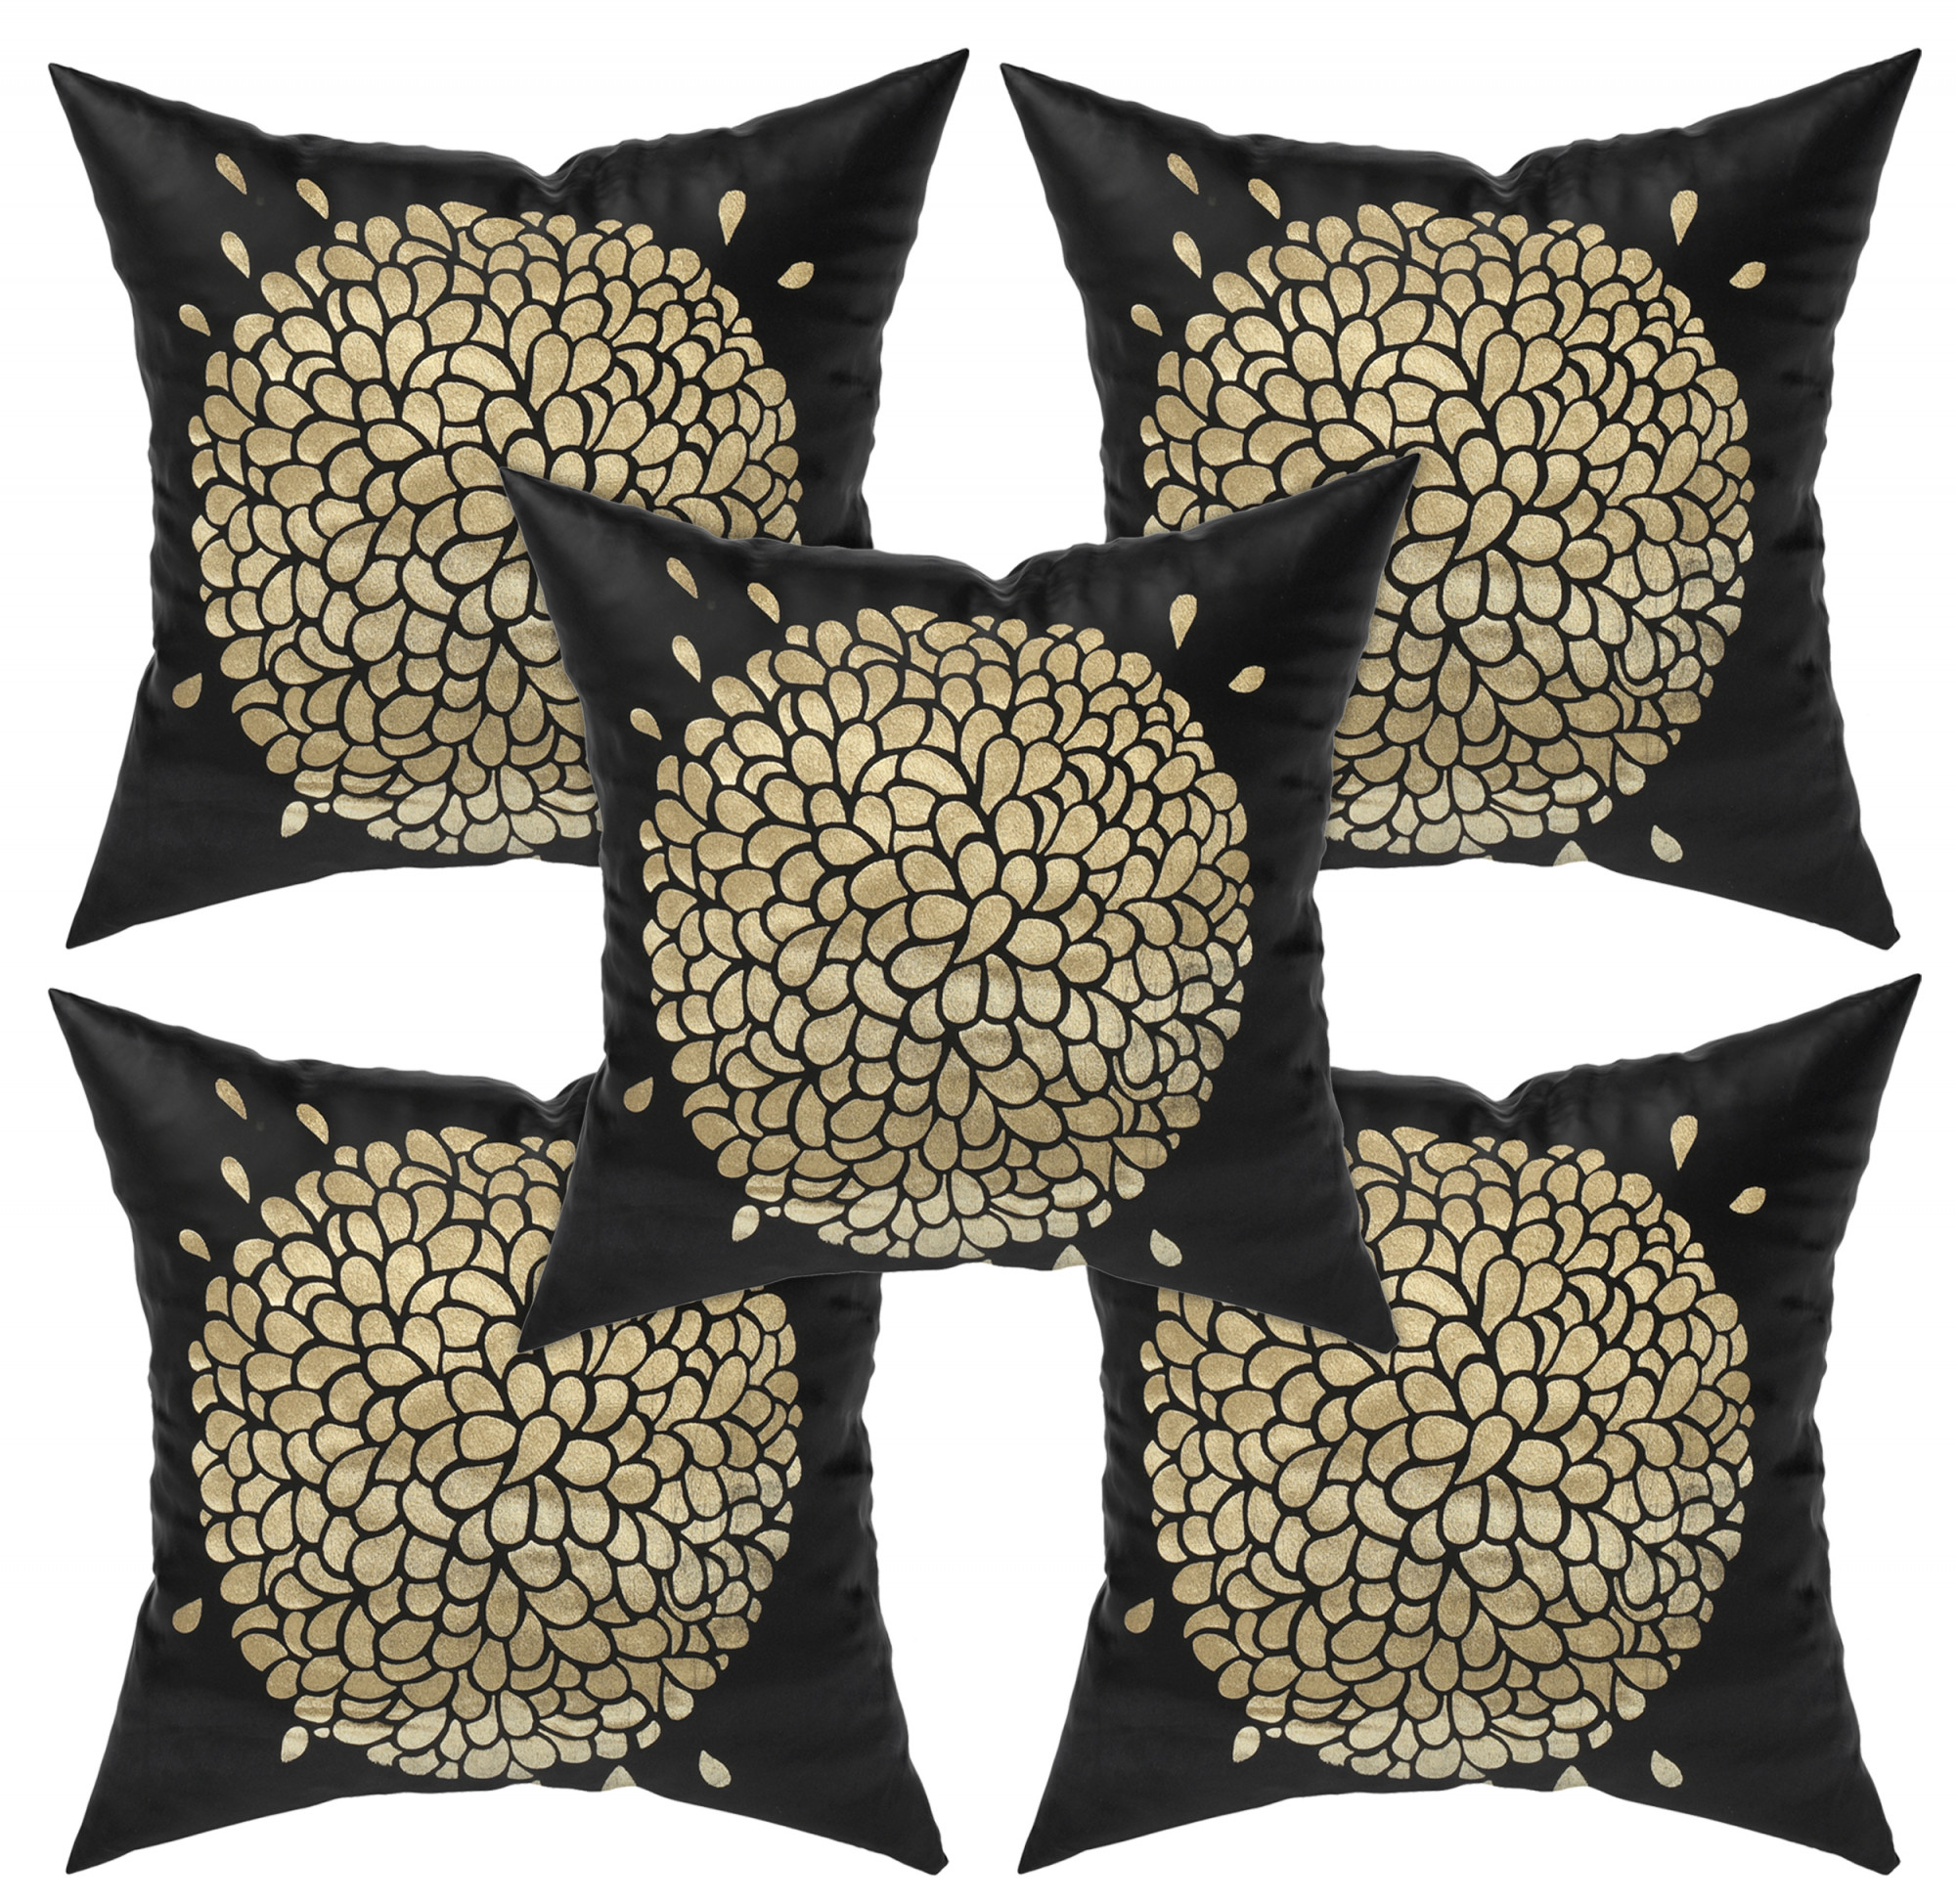 Kuber Industries Velvet Floral Design Soft Decorative Square Throw Pillow Cover, Cushion Covers, Pillow Case For Sofa Couch Bed Chair 16x16 Inch-(Black)